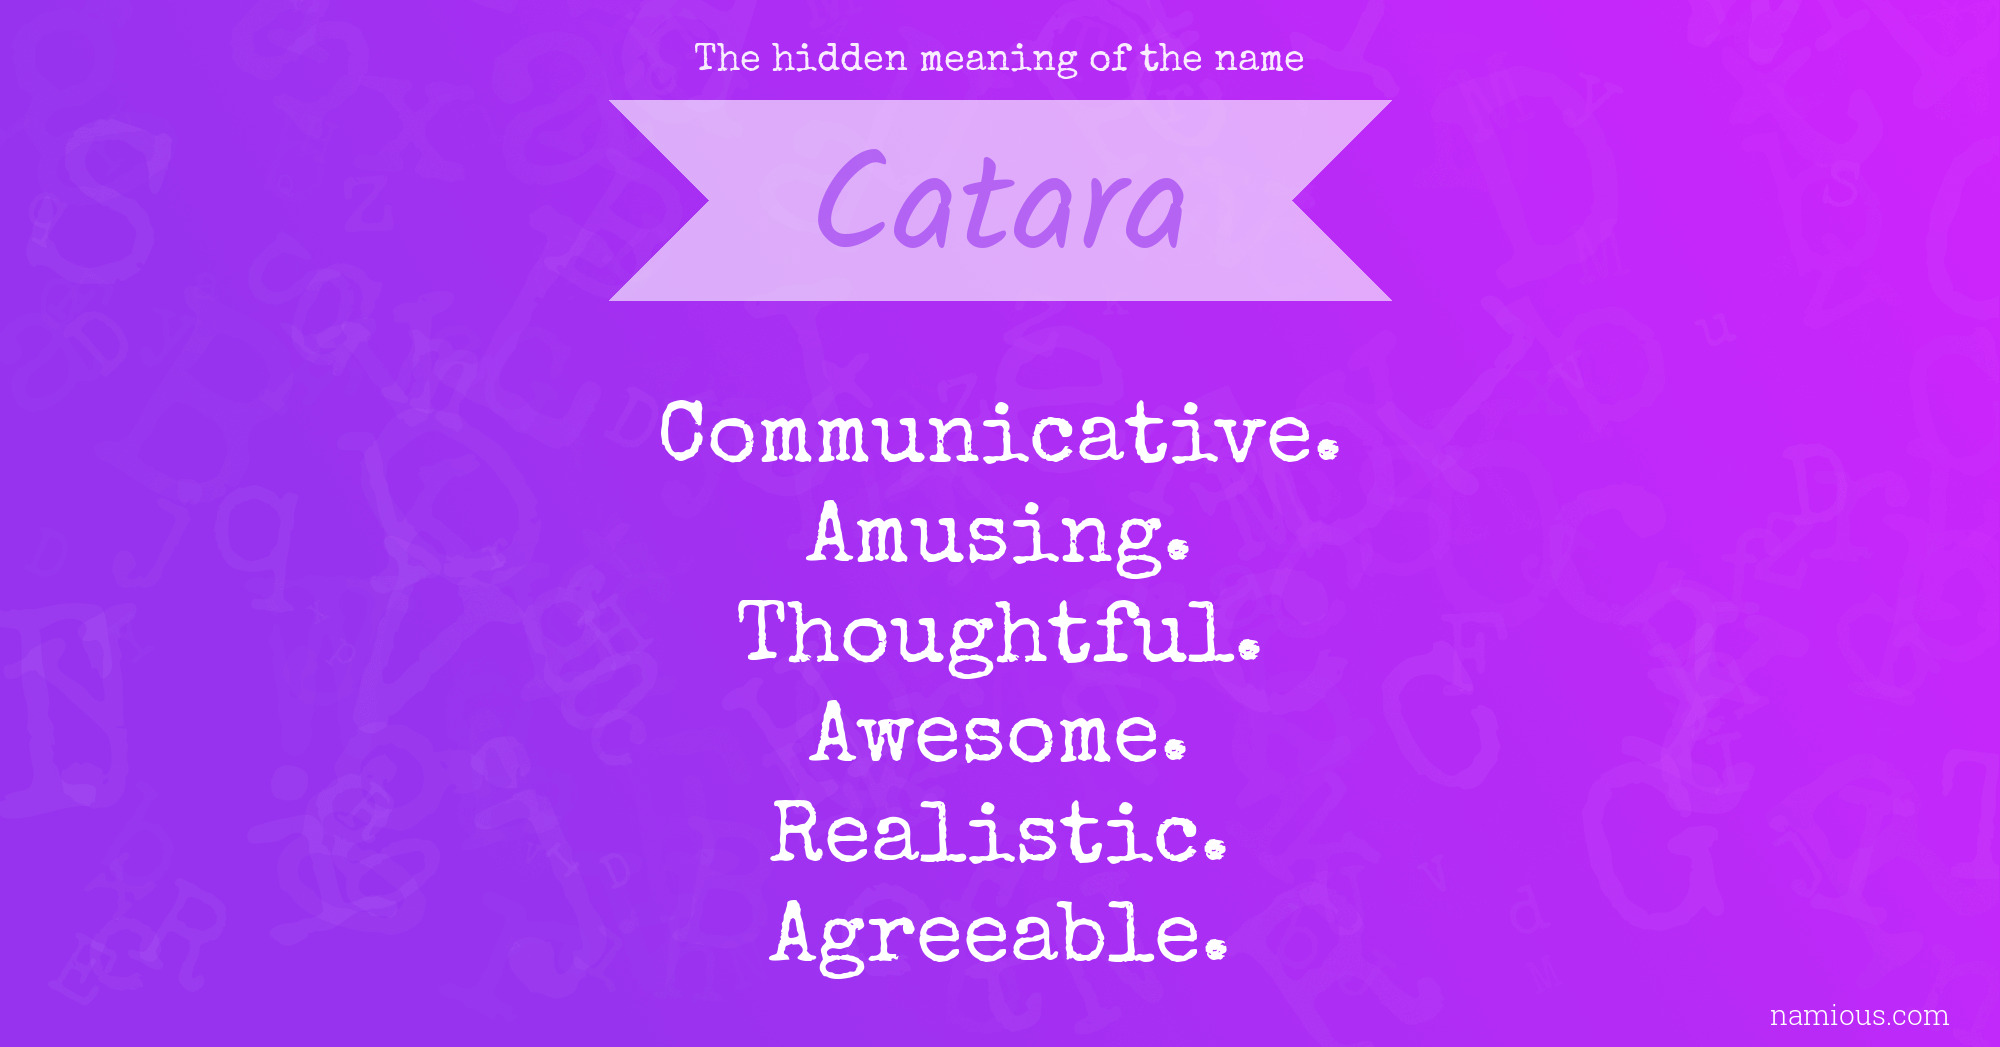 The hidden meaning of the name Catara